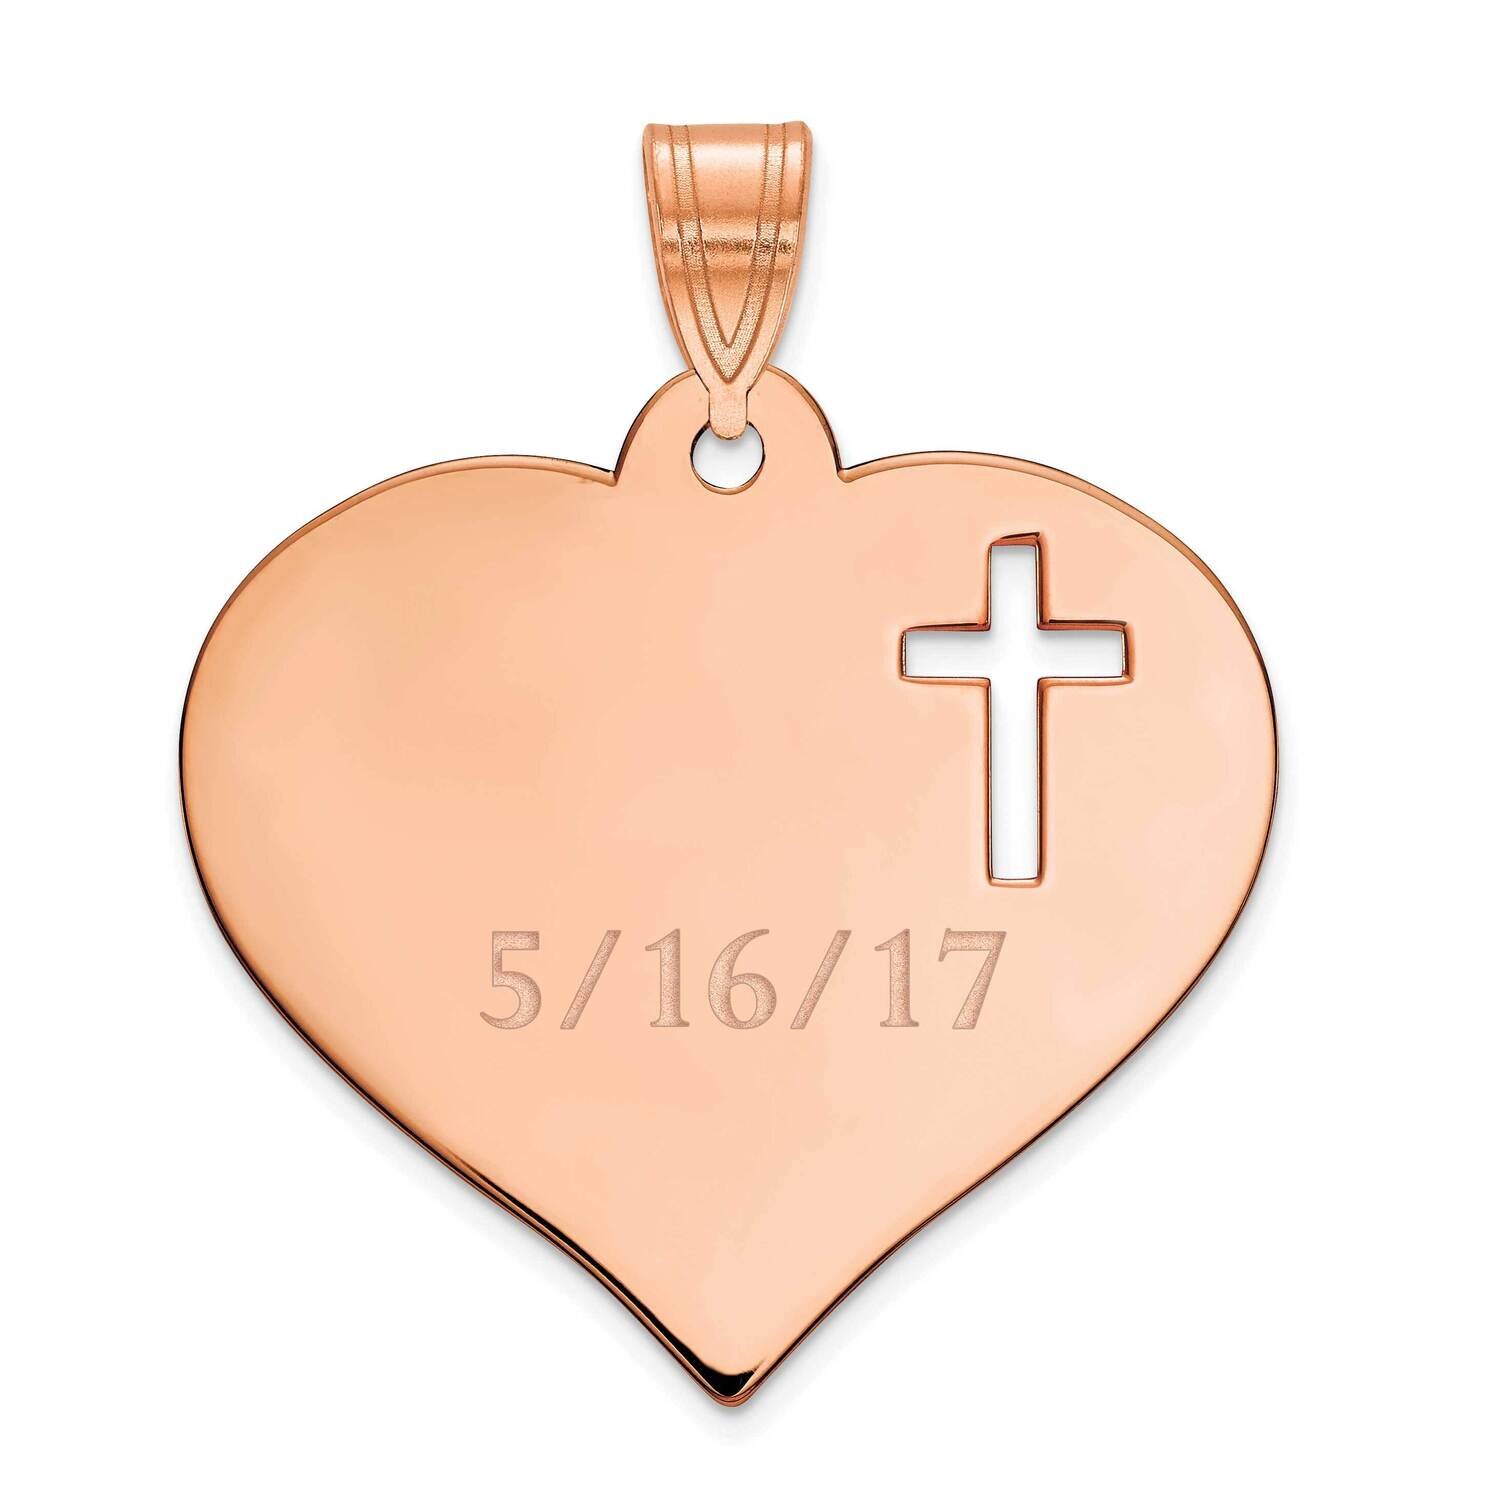 Personalized Heart with Cut Out Cross Pendant 14k Rose Gold XNA787R